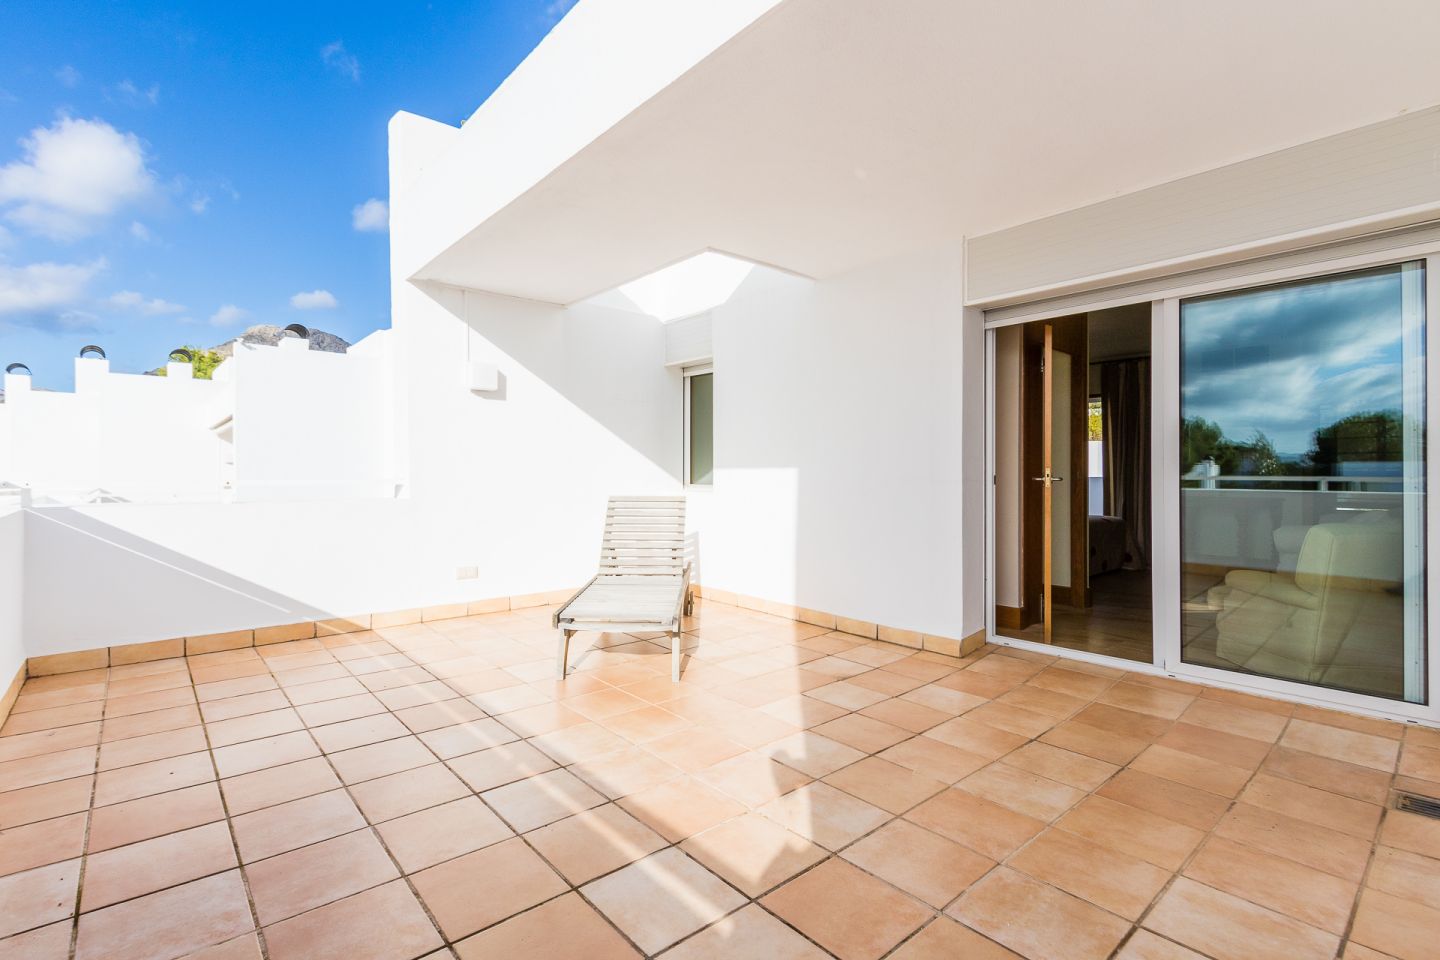 4 Bed Semidetached House for sale in PUERTO POLLENSA 19